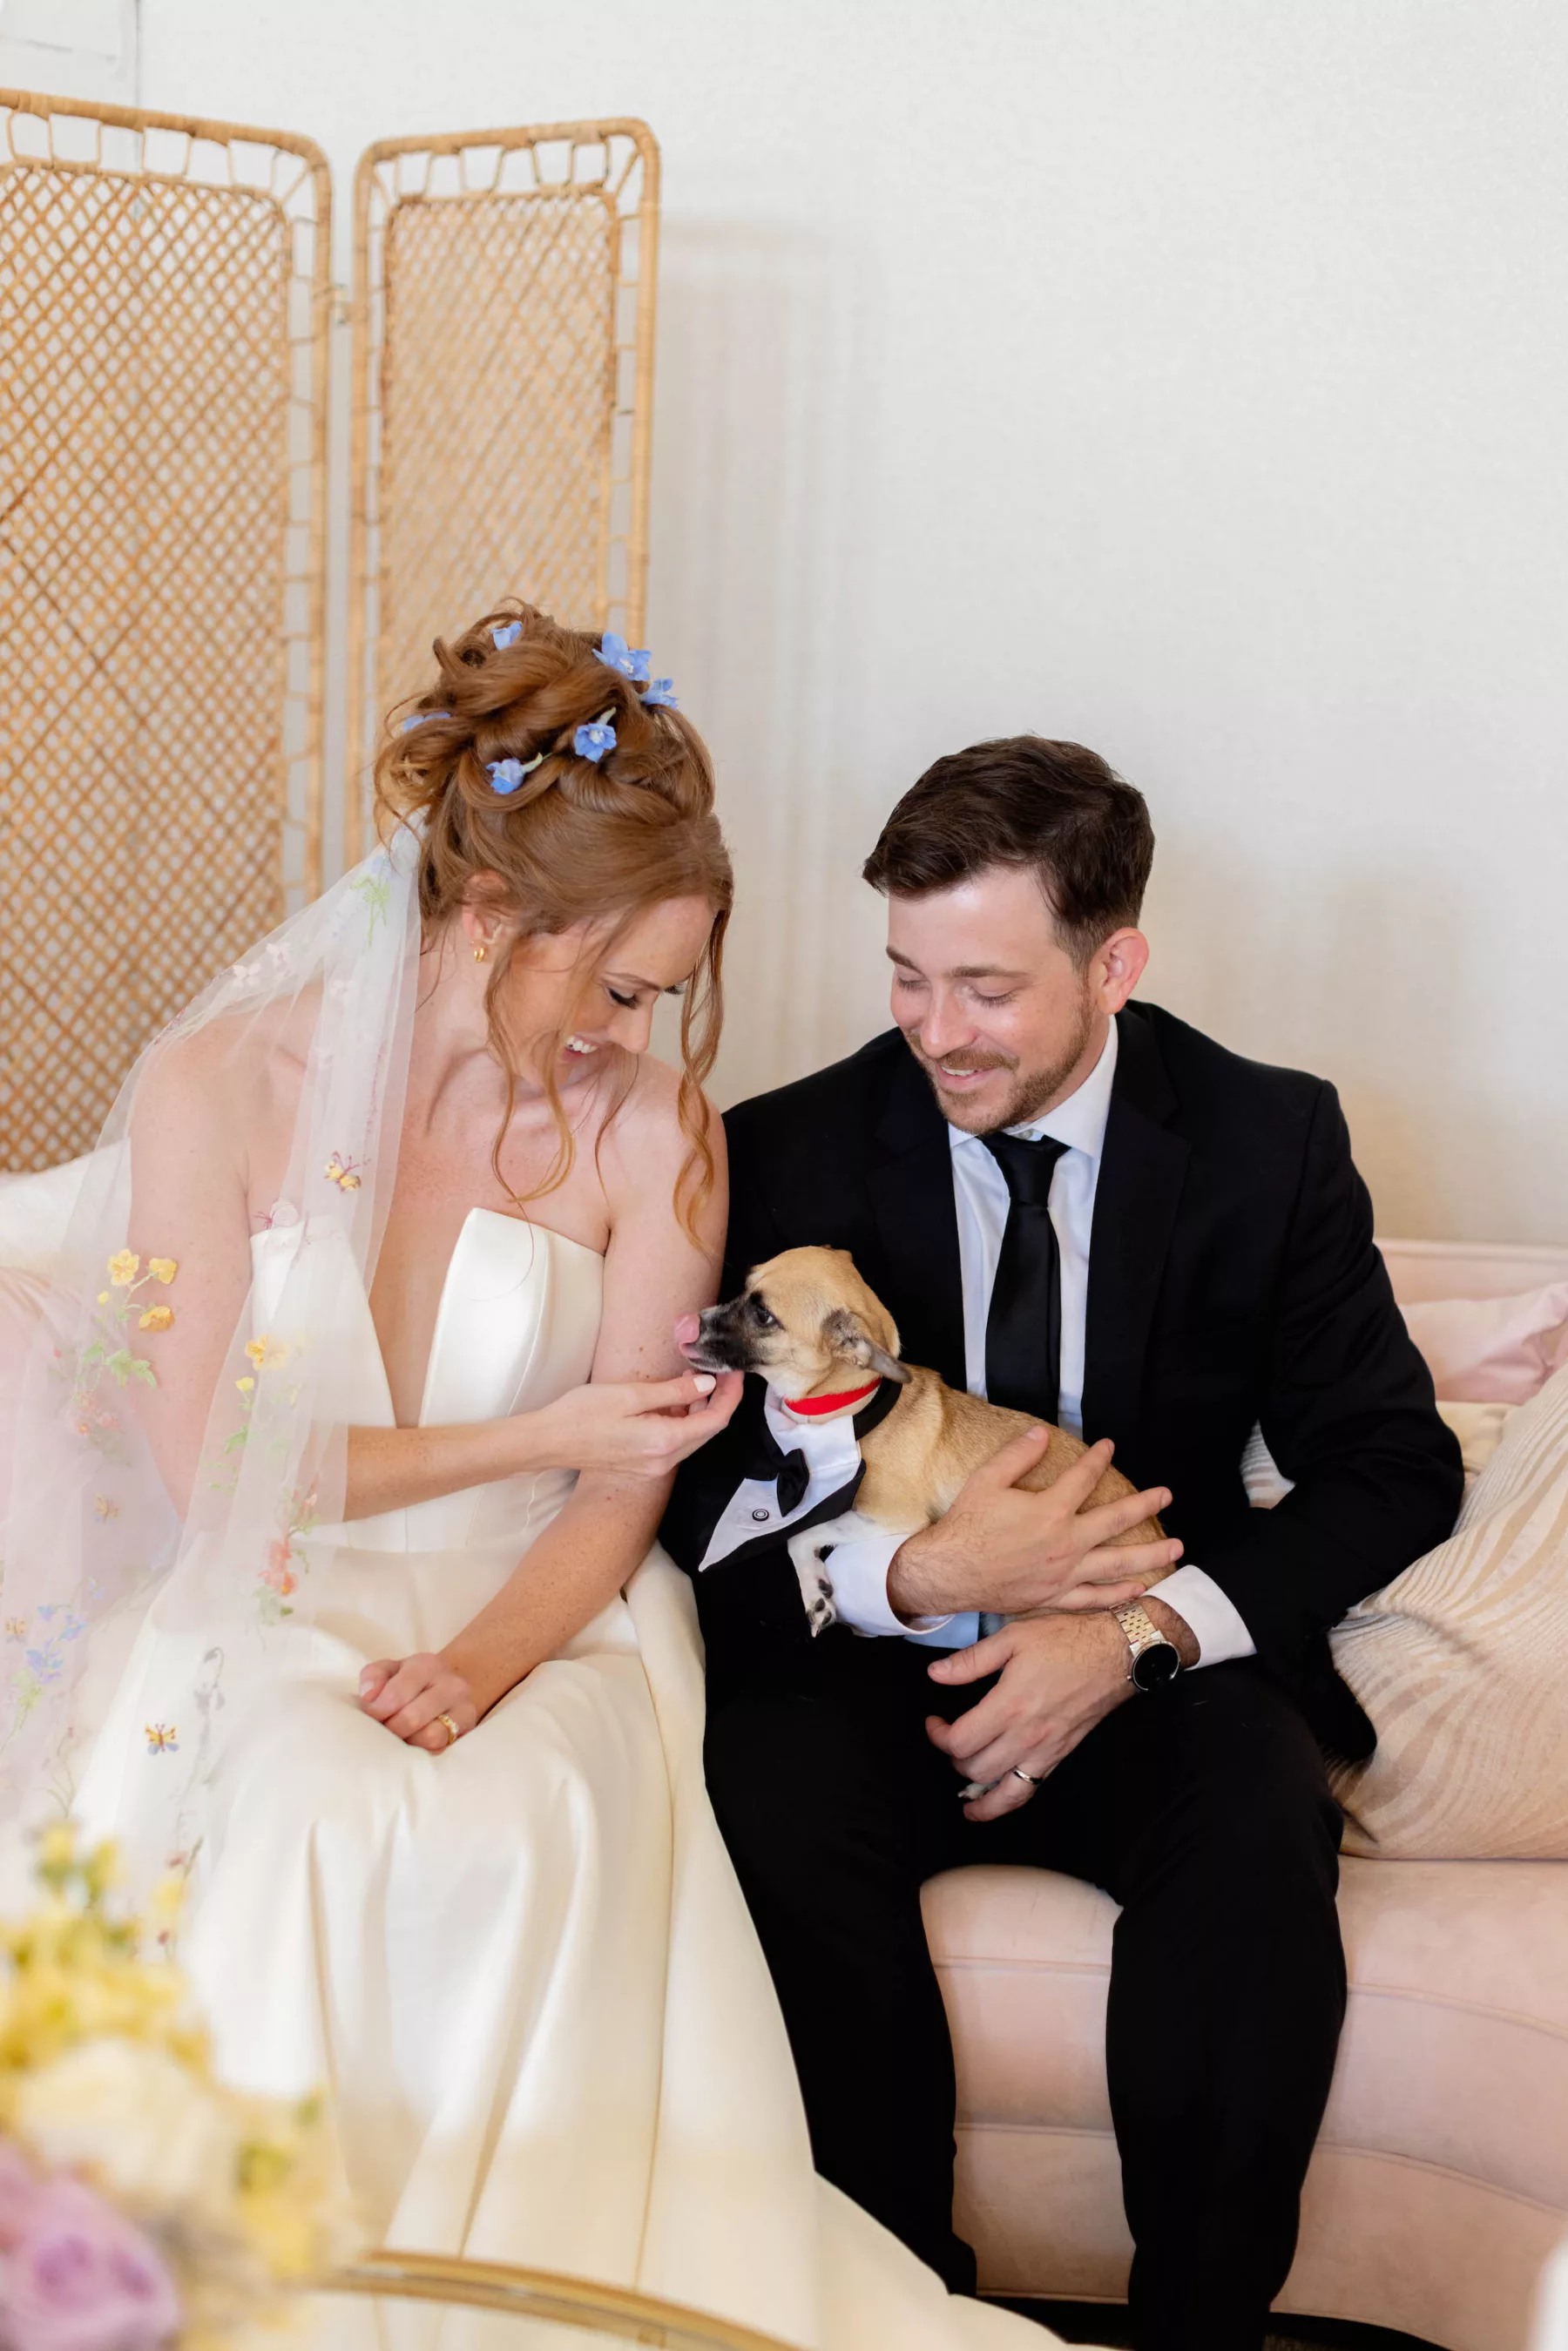 Bride and Groom with Dog | Dog in Tuxedo Bandana | Tampa Bay Fairytail Pet Care